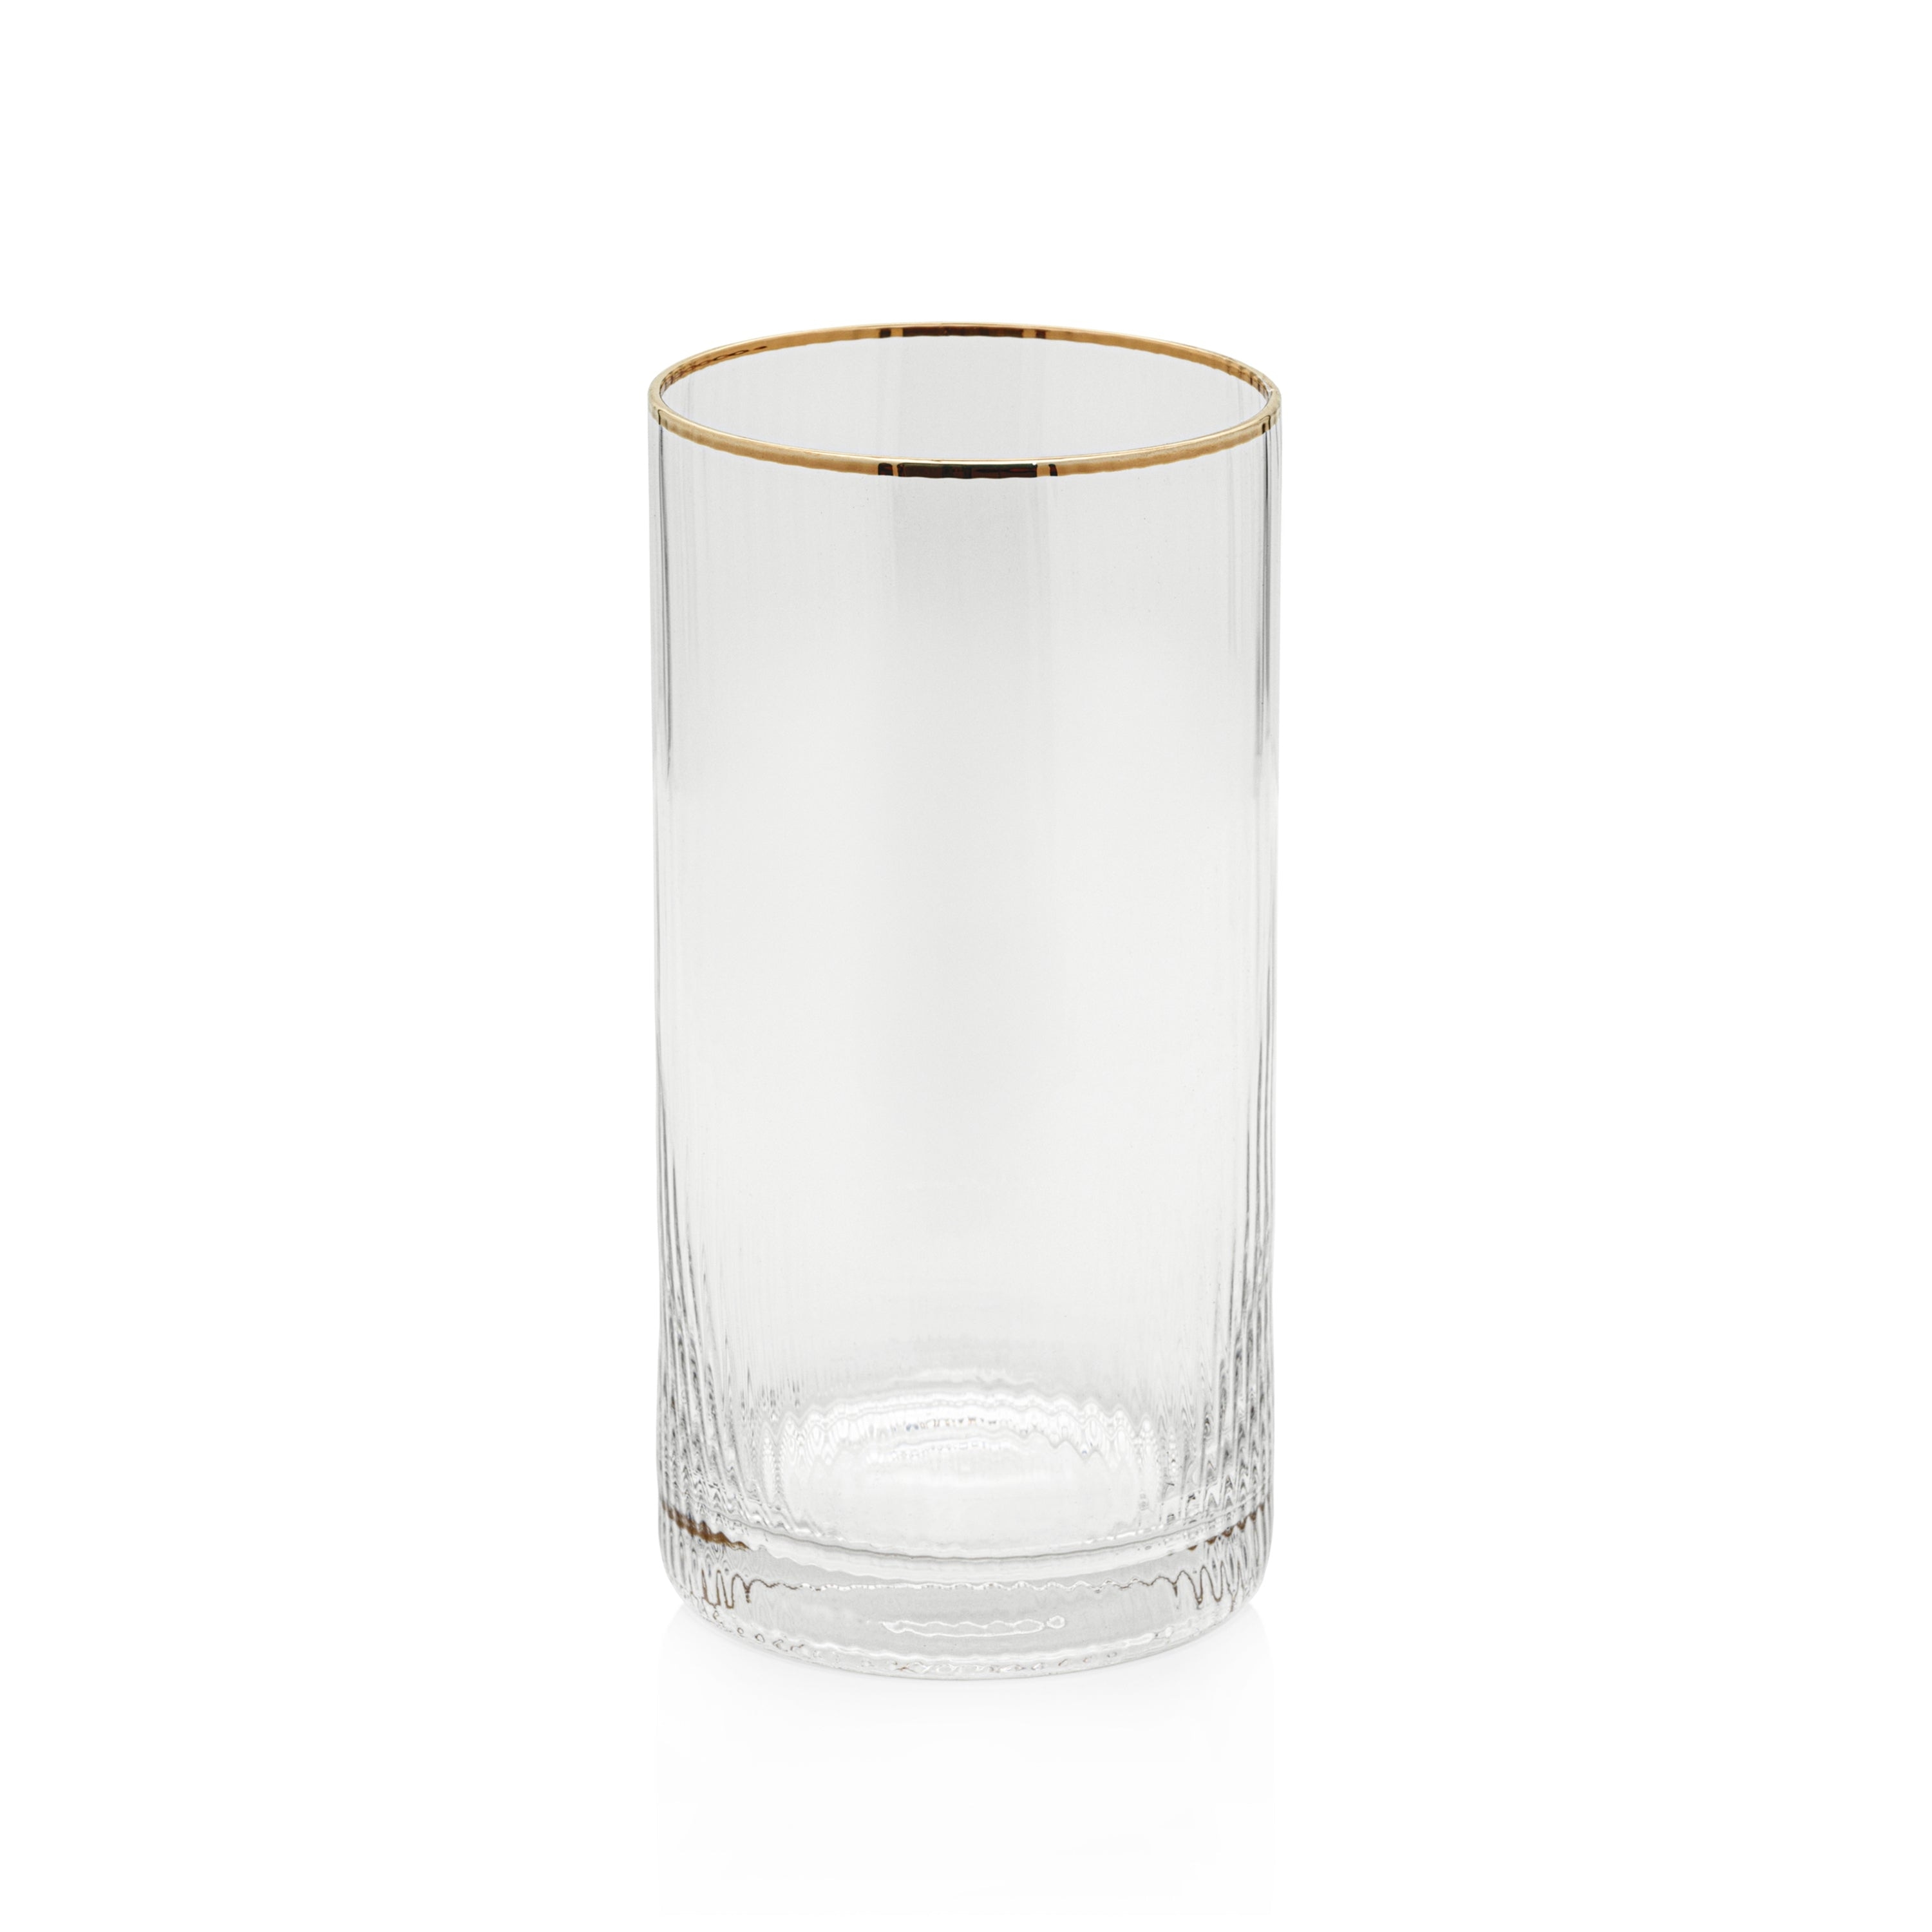 https://ak1.ostkcdn.com/images/products/is/images/direct/4358b2222310a41857e52dc562651725ae798f71/Optic-Highball-Glasses-with-Gold-Rim%2C-Set-of-6.jpg